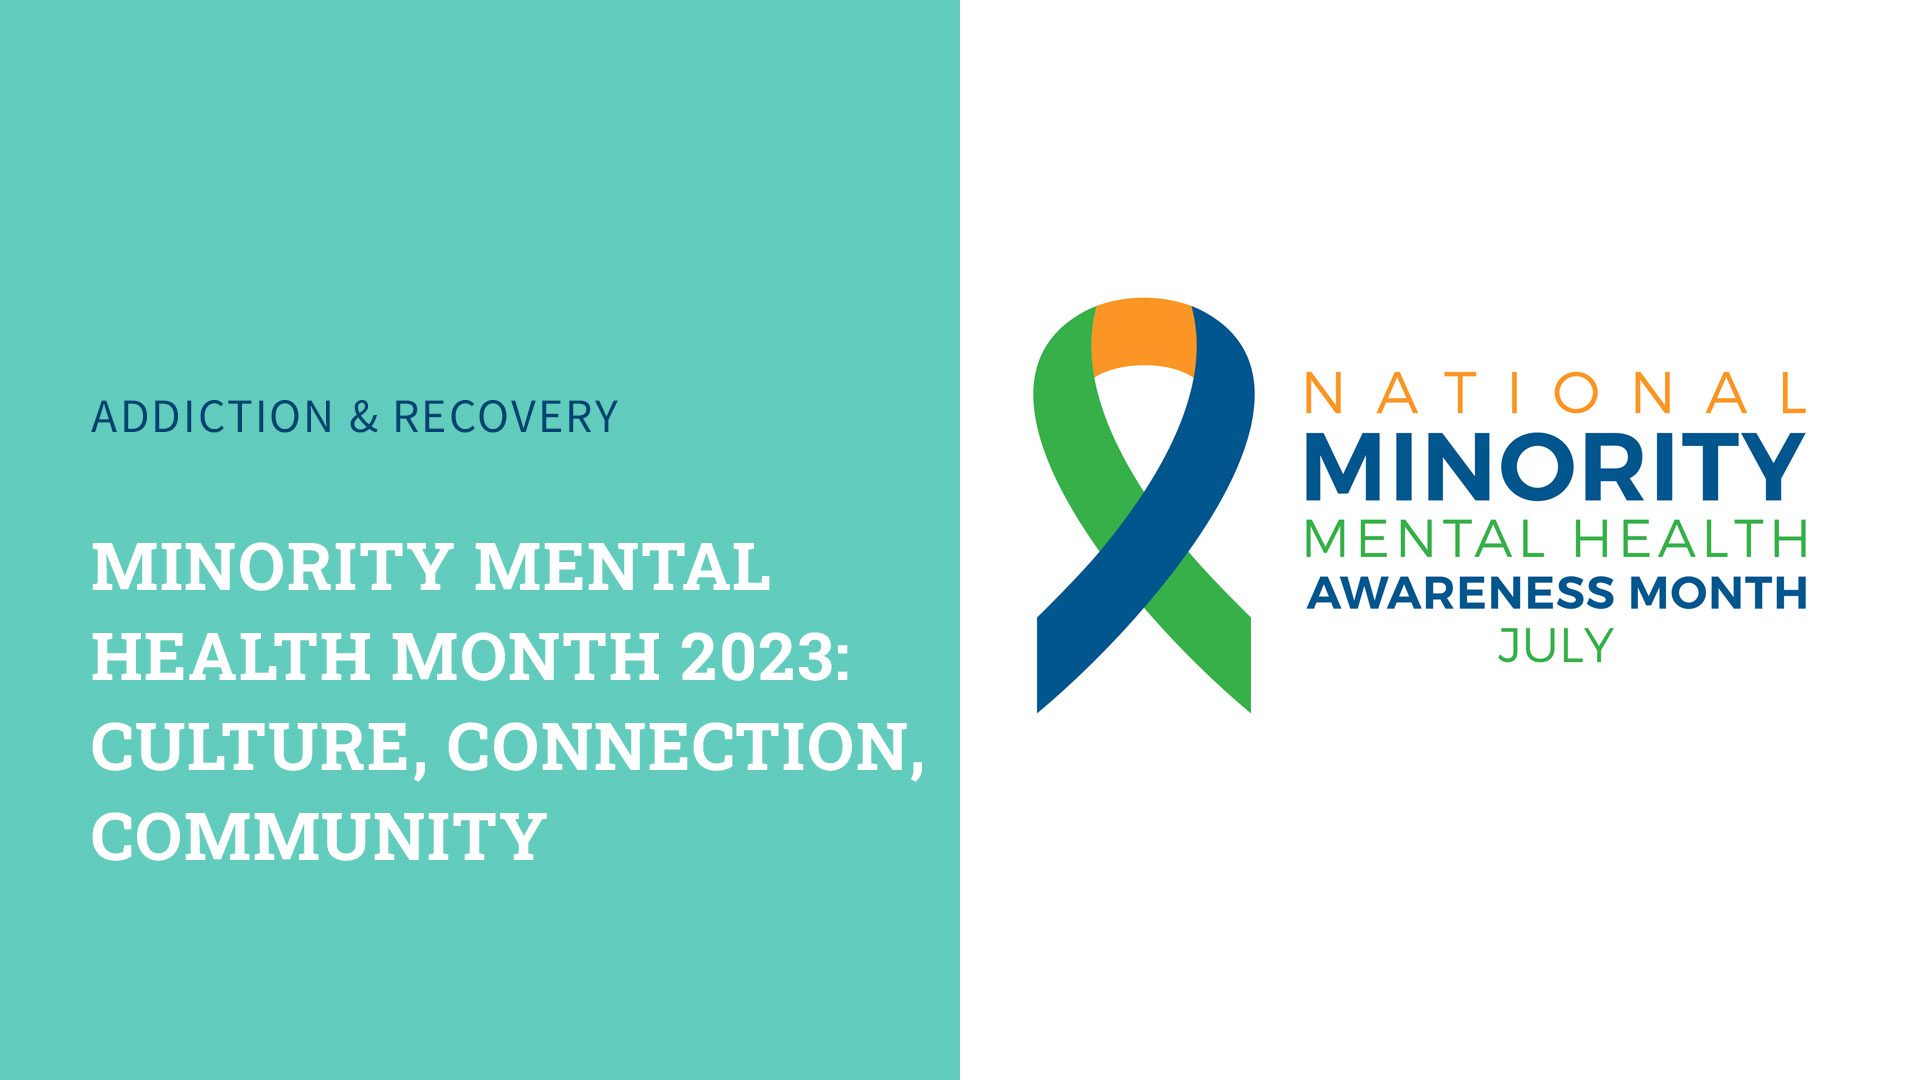 graphic of "national minority mental health awareness month"